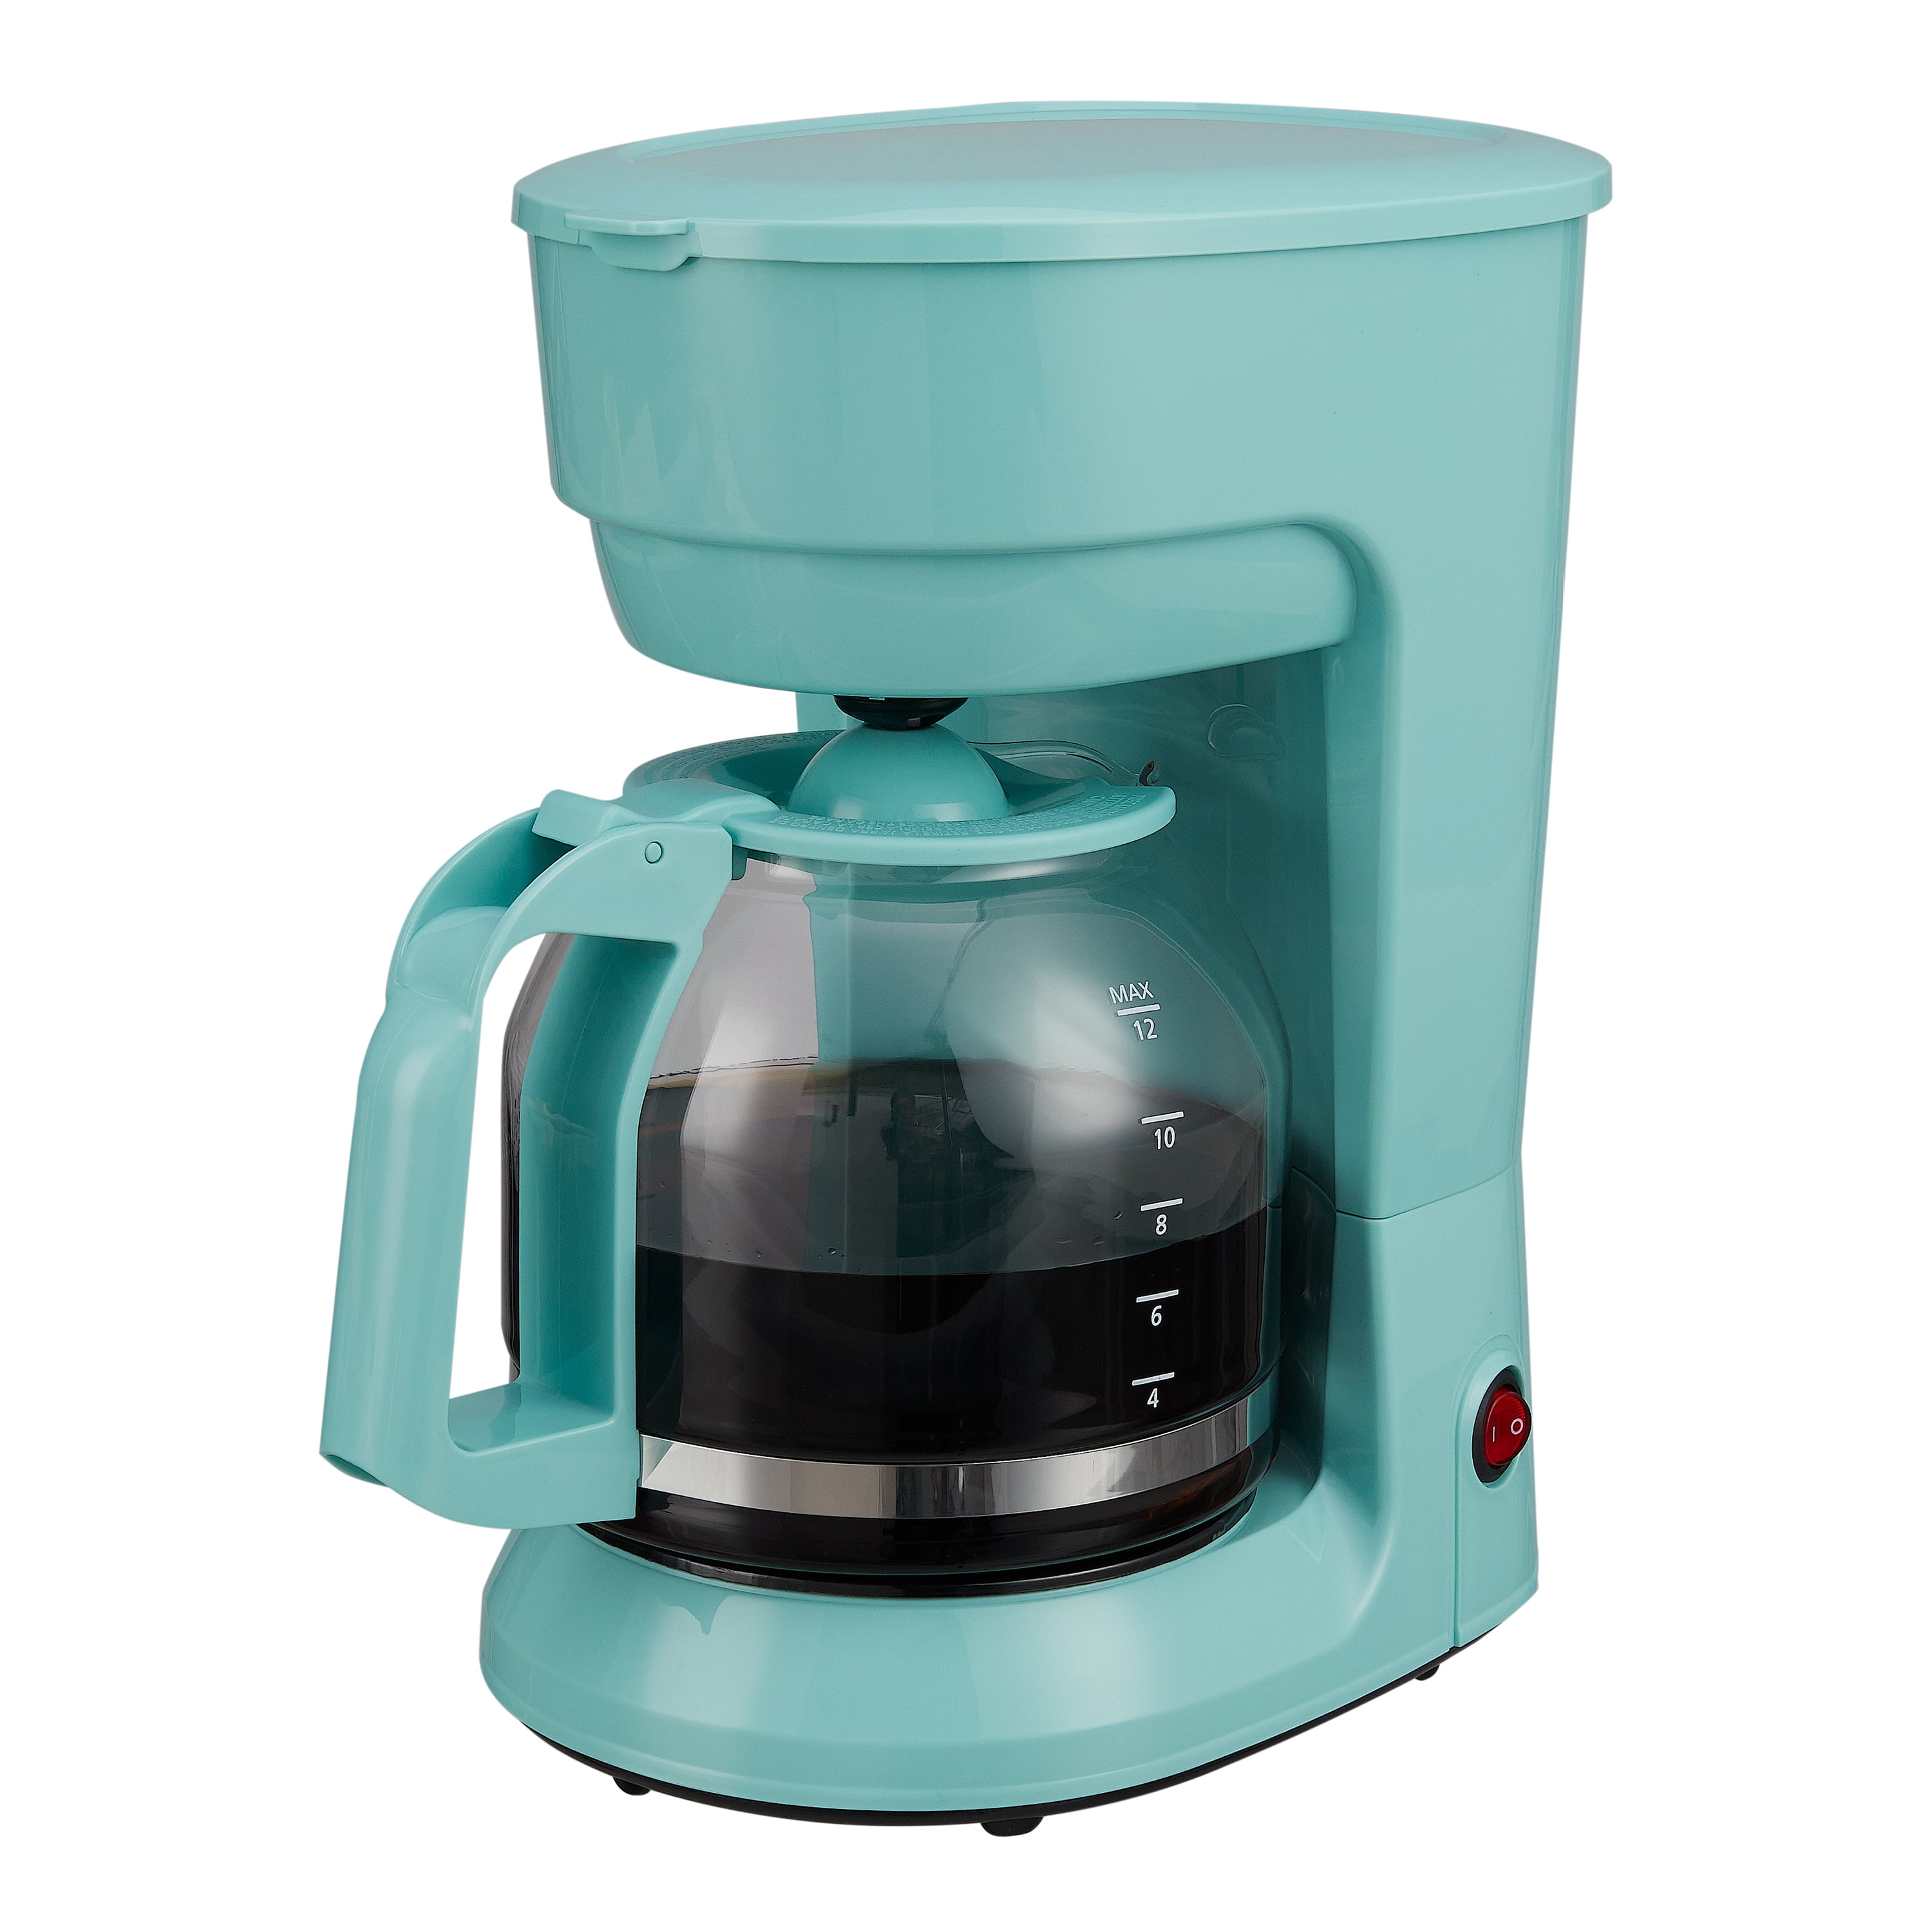 Mainstays 12Cup Glass Carafe Coffee Maker, Mint Green